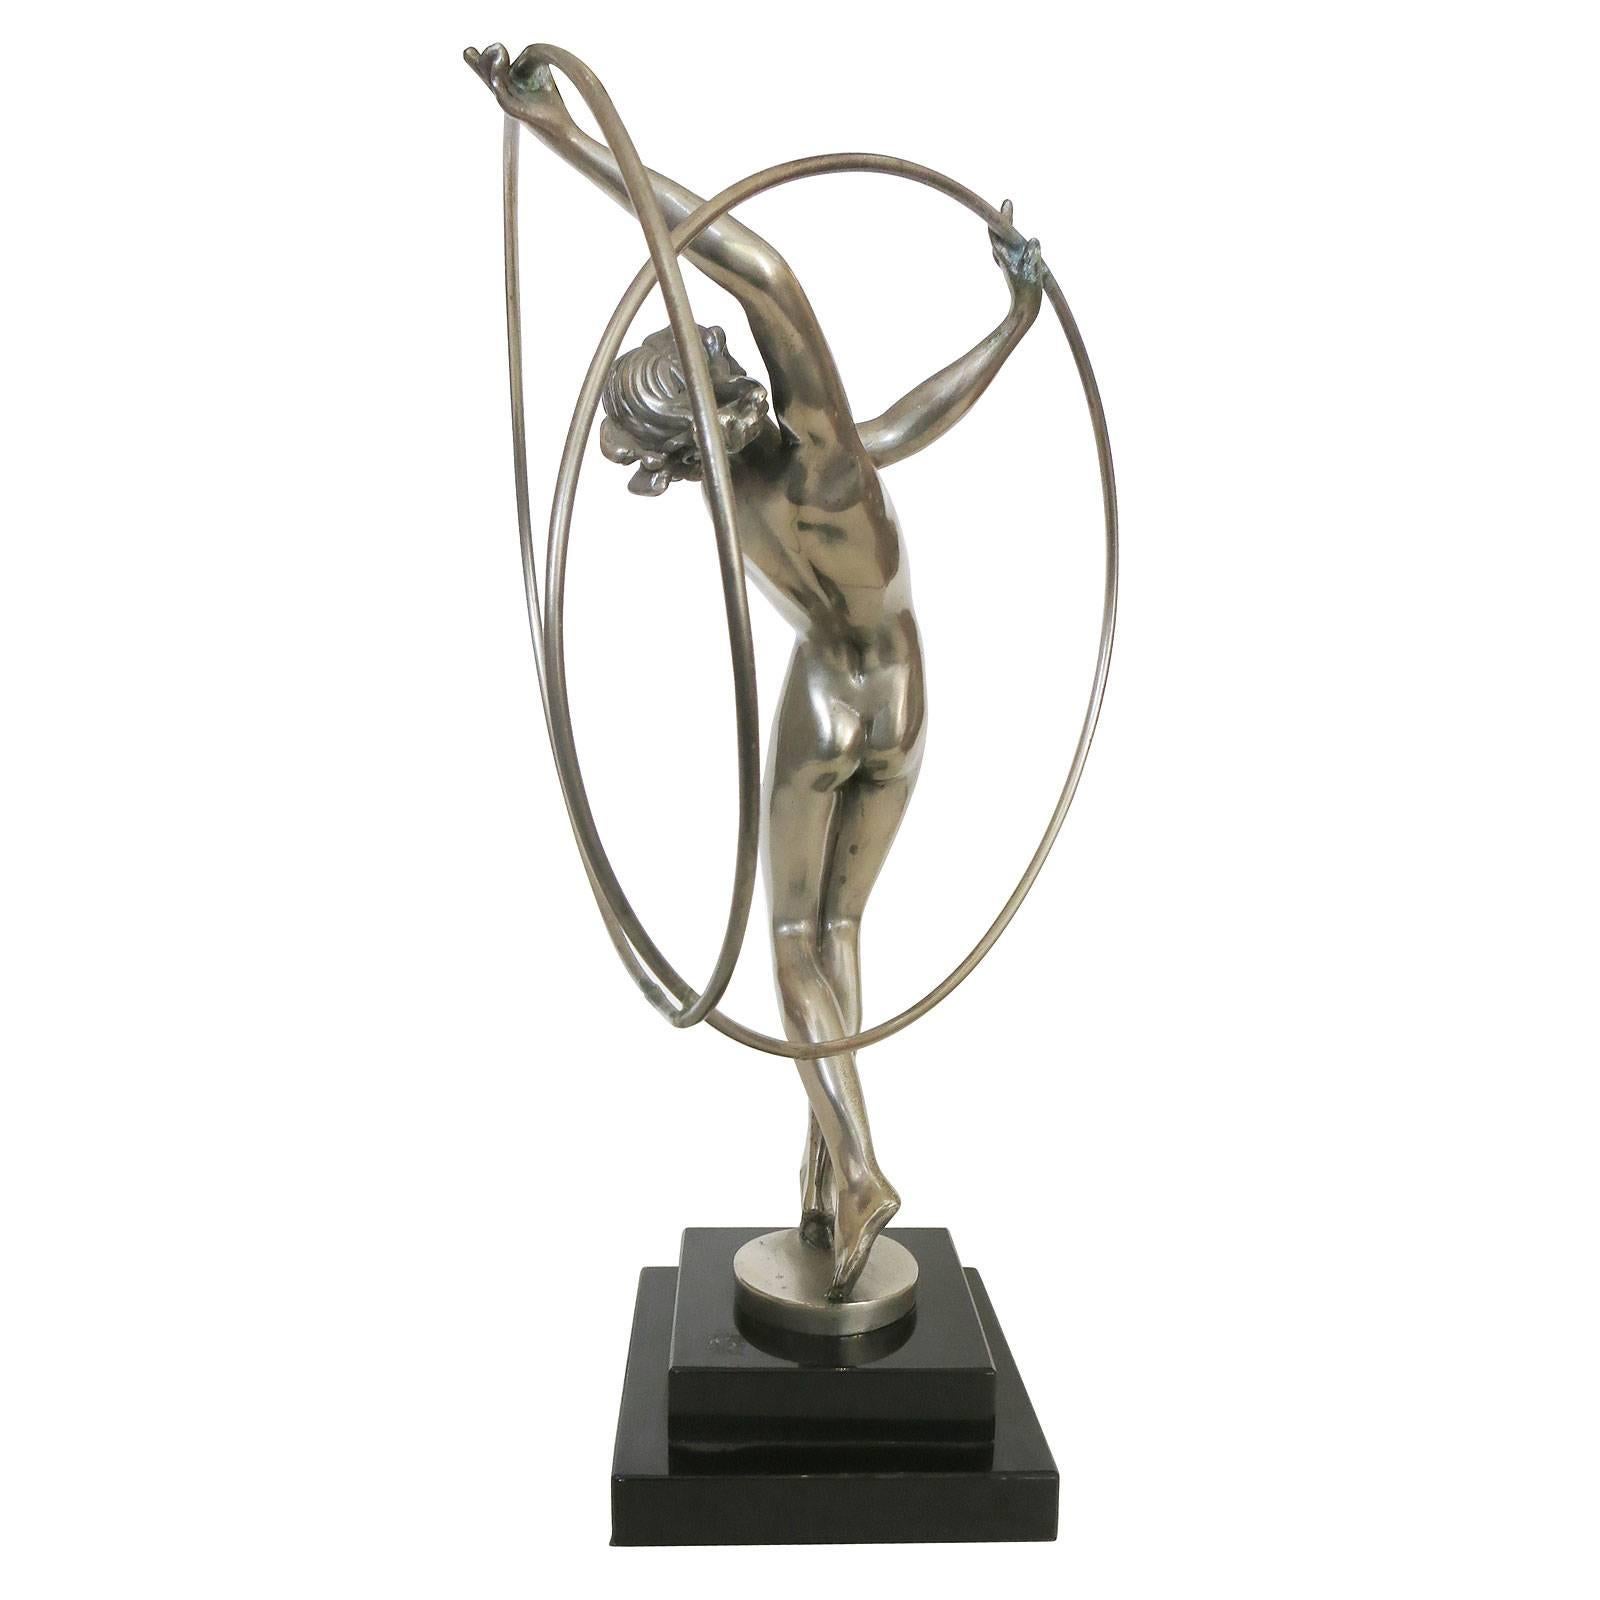 Limousin Art Deco style silver nude flapper dancer with hoop statue in the manner of Max Le Verrier.
This gorgeous looking statue features a cast bronze nude flapper statue with an antique silver finish. This sculpted figure stands on top of a black